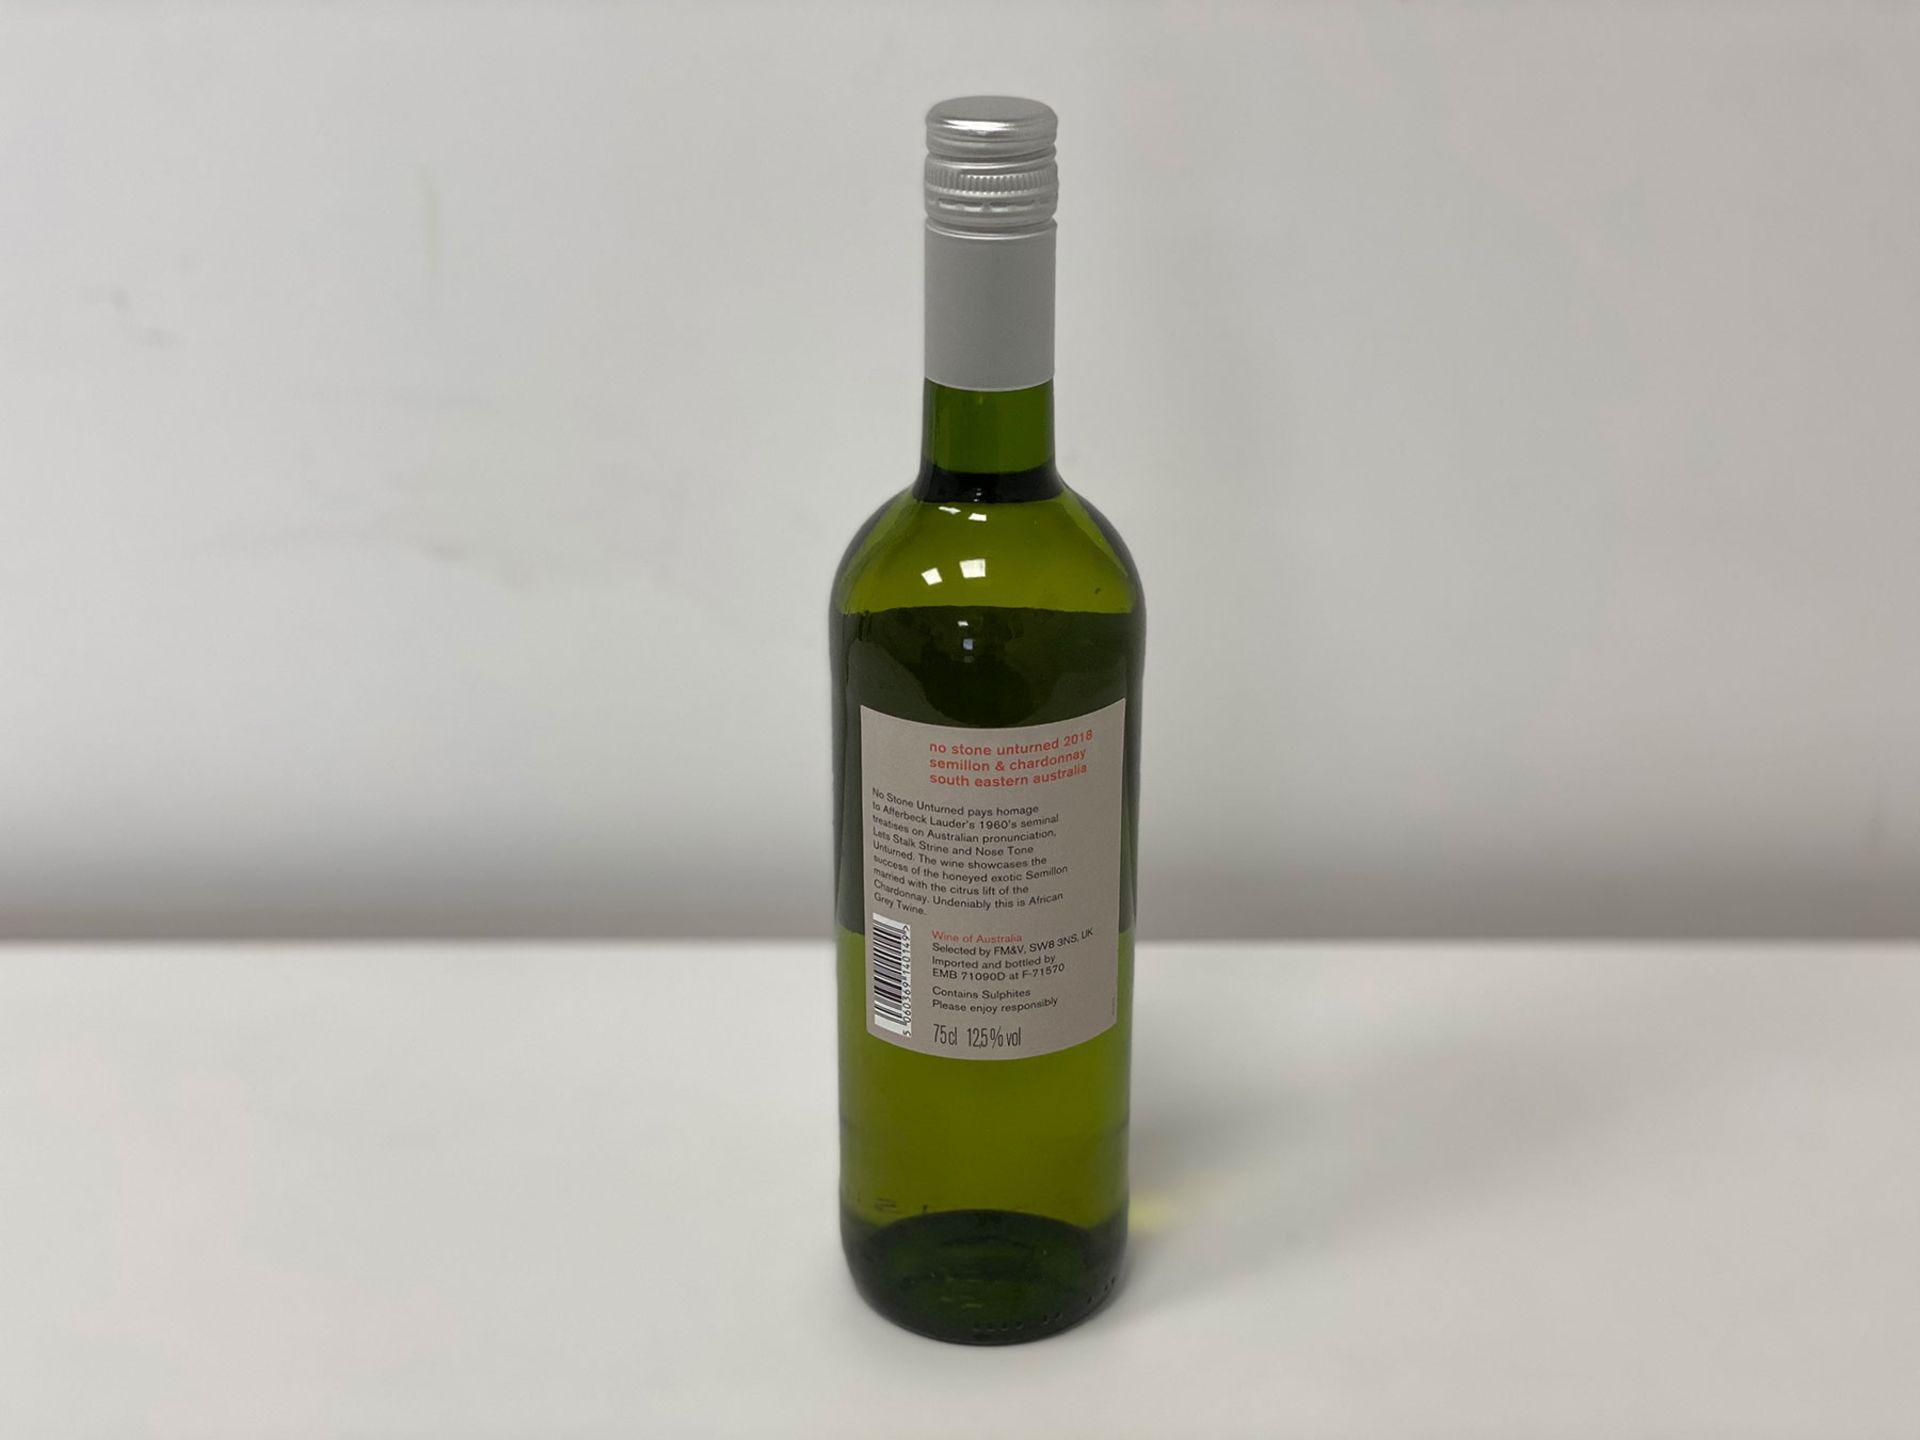 60 Bottles (10 Cases) Paul Sapin - No Stone Unturned - SÃ©millon and Chardonnay - Murray Darling - Image 2 of 2